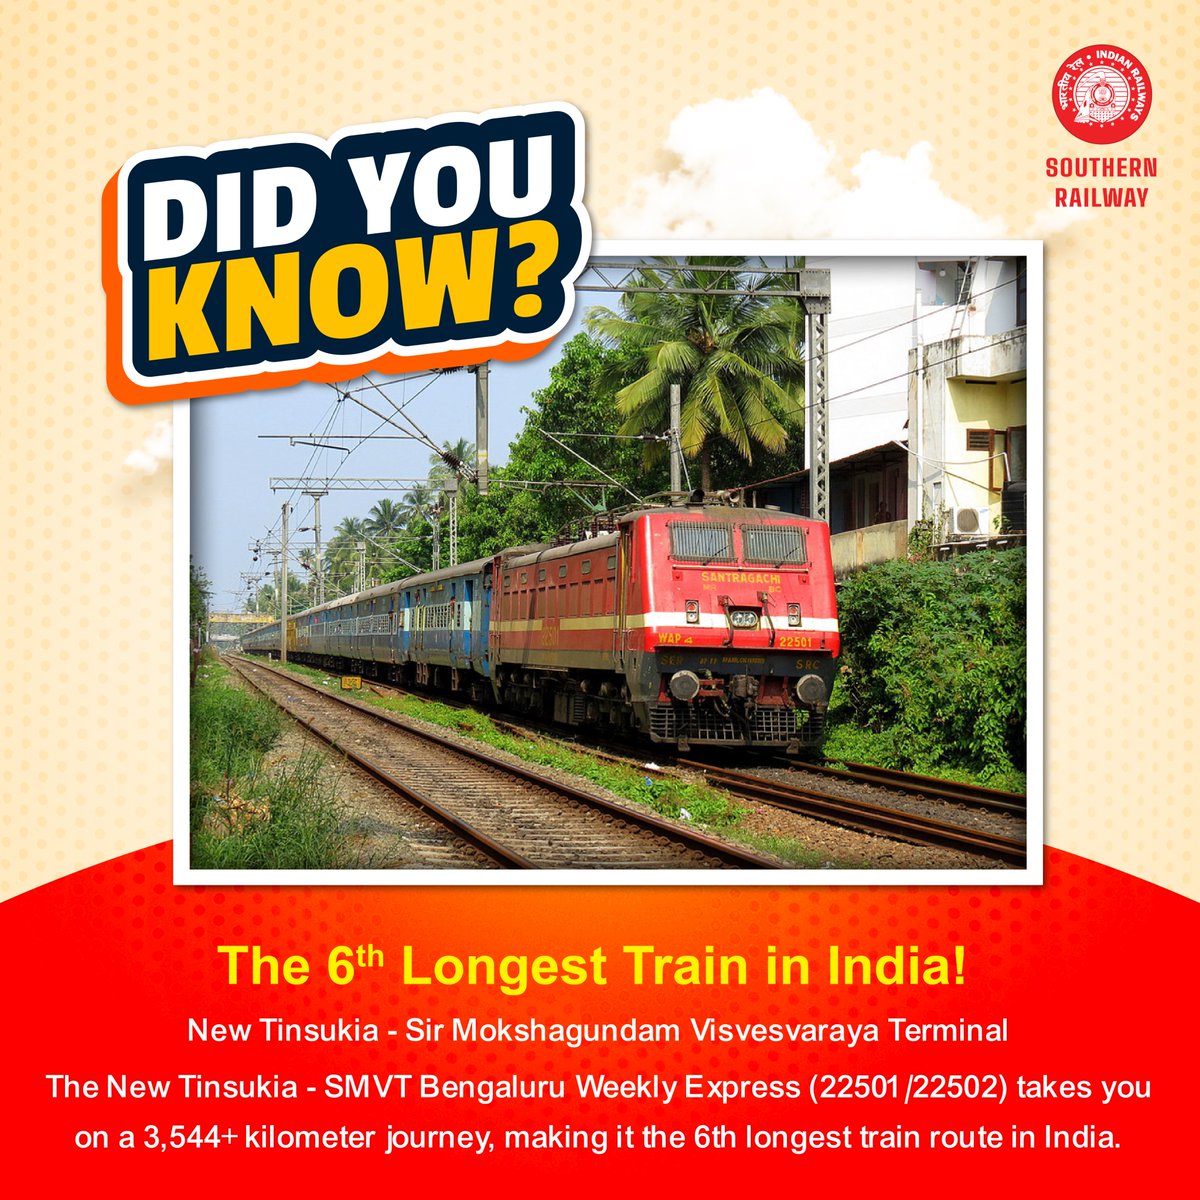 #India's 6th Longest #Train Route! 🚆 

The New Tinsukia - SMVT Bengaluru Superfast Express (20501/20502), spanning over 3,544 kilometers.   

Discover the beauty of diverse landscapes and cultures as you traverse this remarkable route. 📷

#SouthernRailway